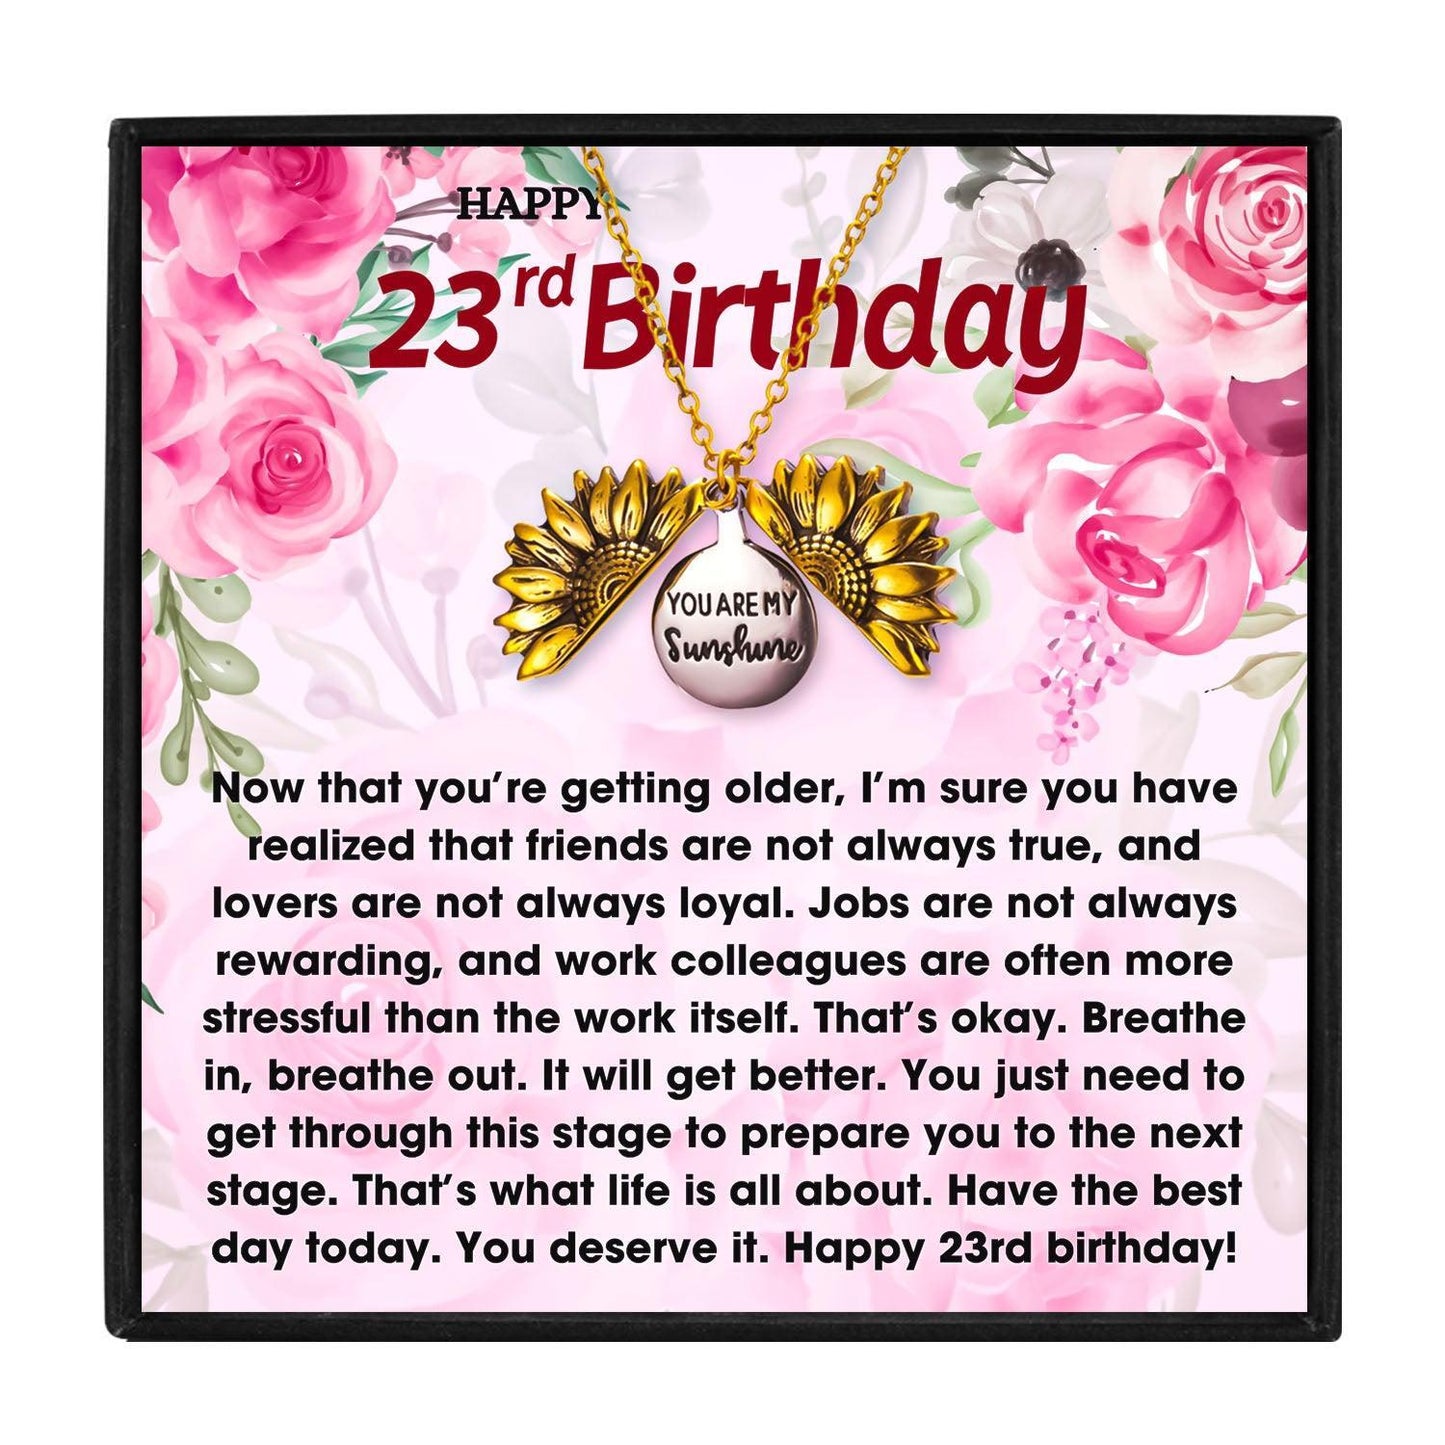 23rd Birthday Gifts Ideas for Girls and Women in 2023 | 23rd Birthday Gifts Ideas for Girls and Women - undefined | 23 birthday gift, 23rd birthday gift ideas, 23rd birthday ideas for her | From Hunny Life | hunnylife.com